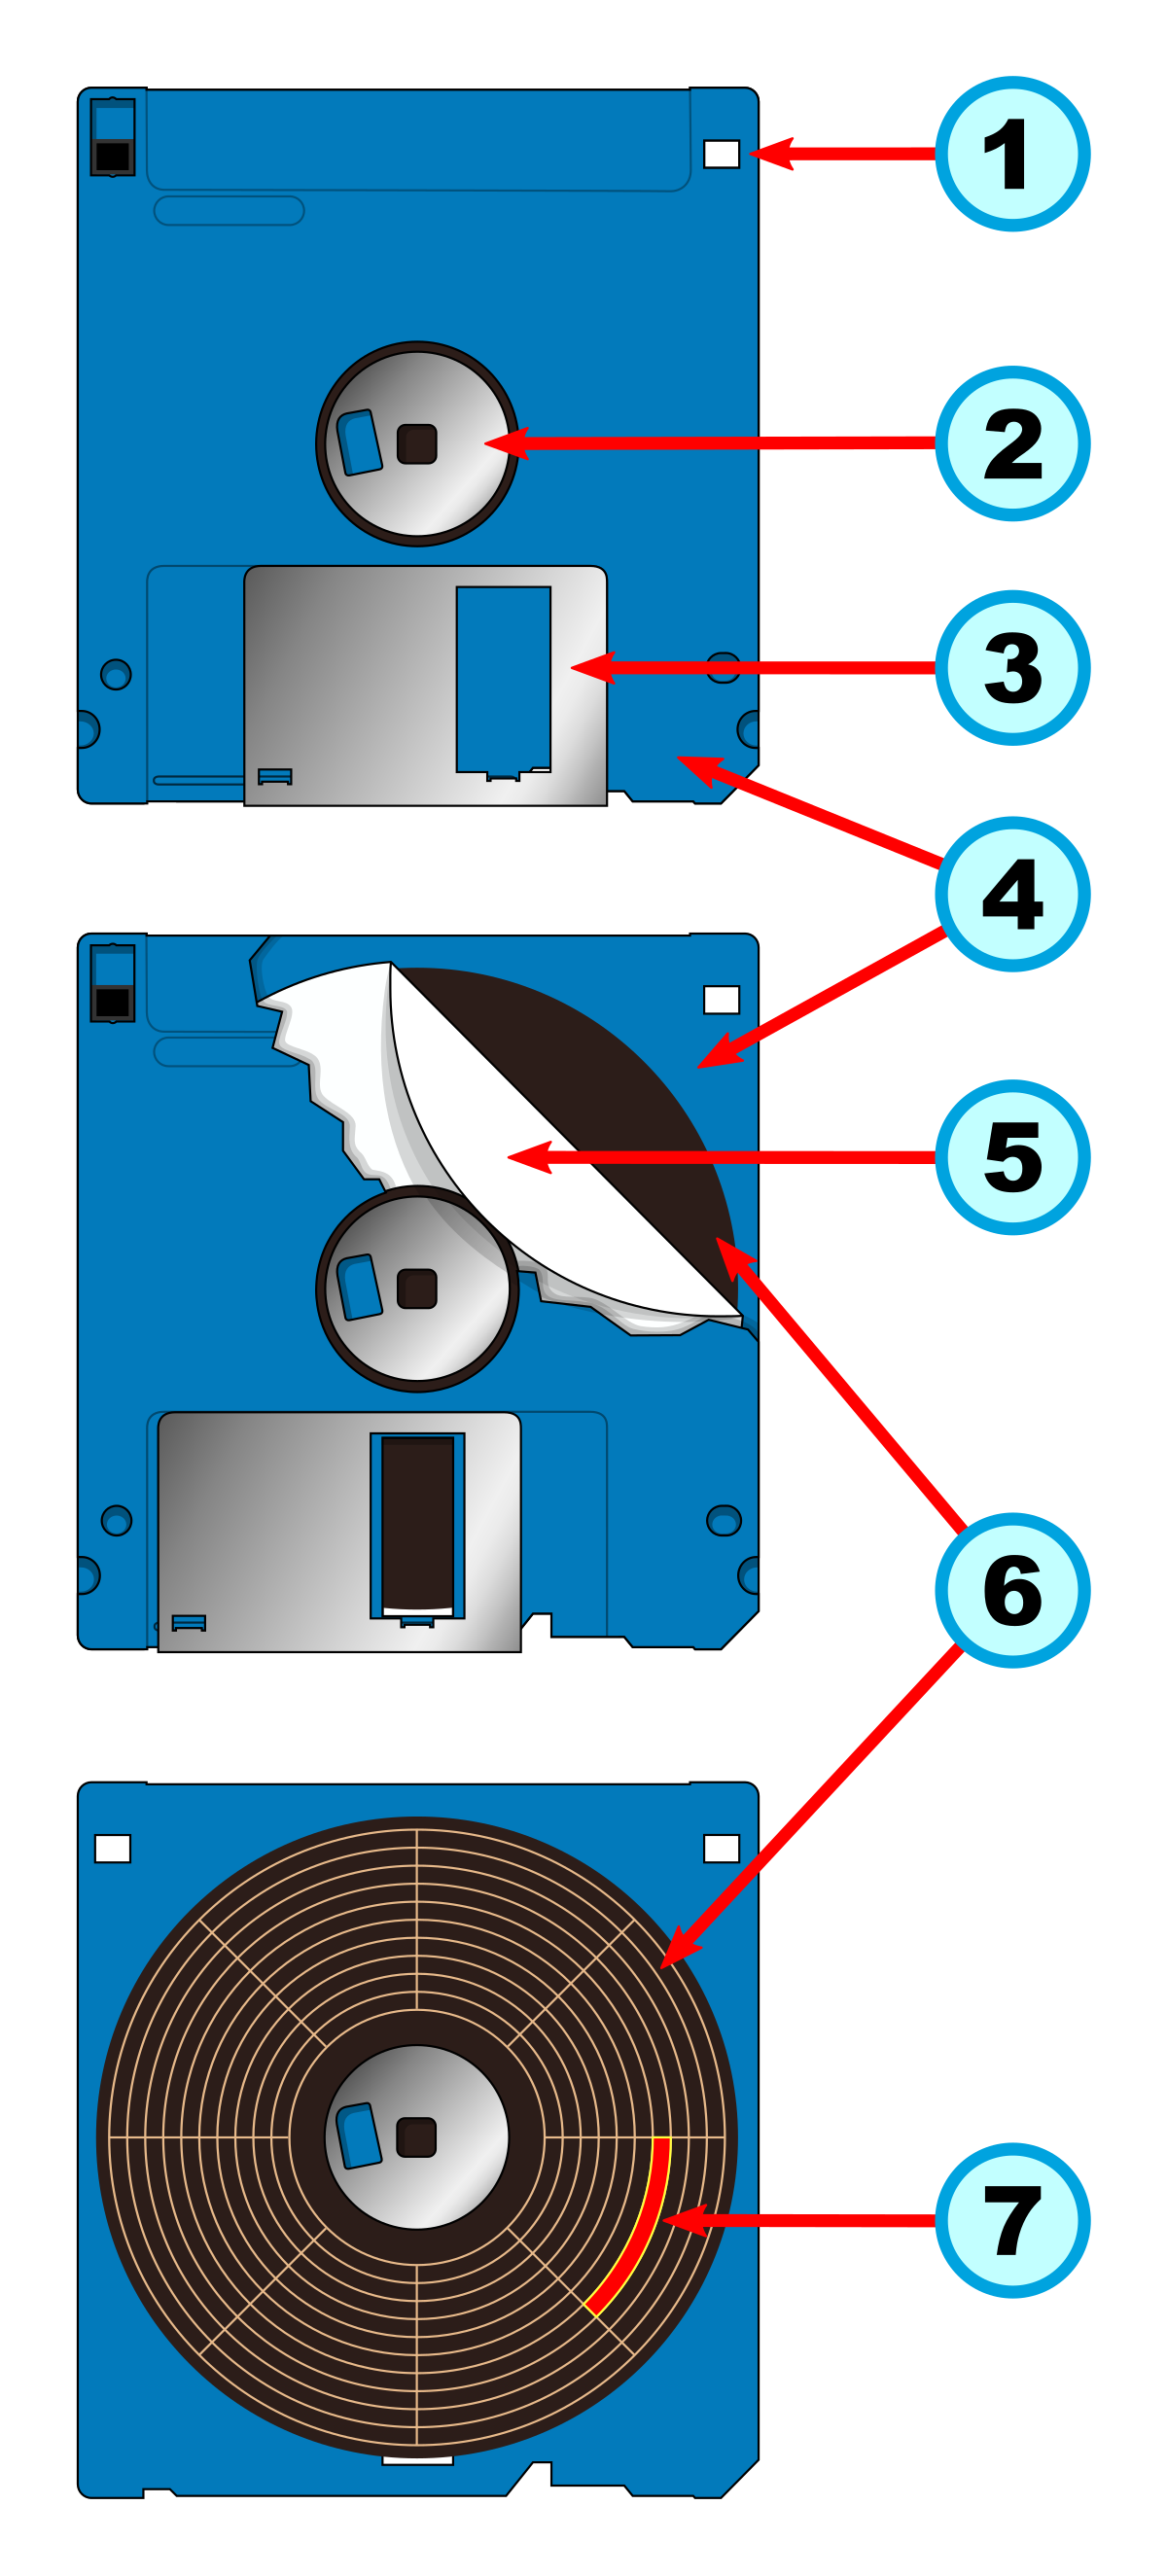 A close-up image of a hard drive with visible components.